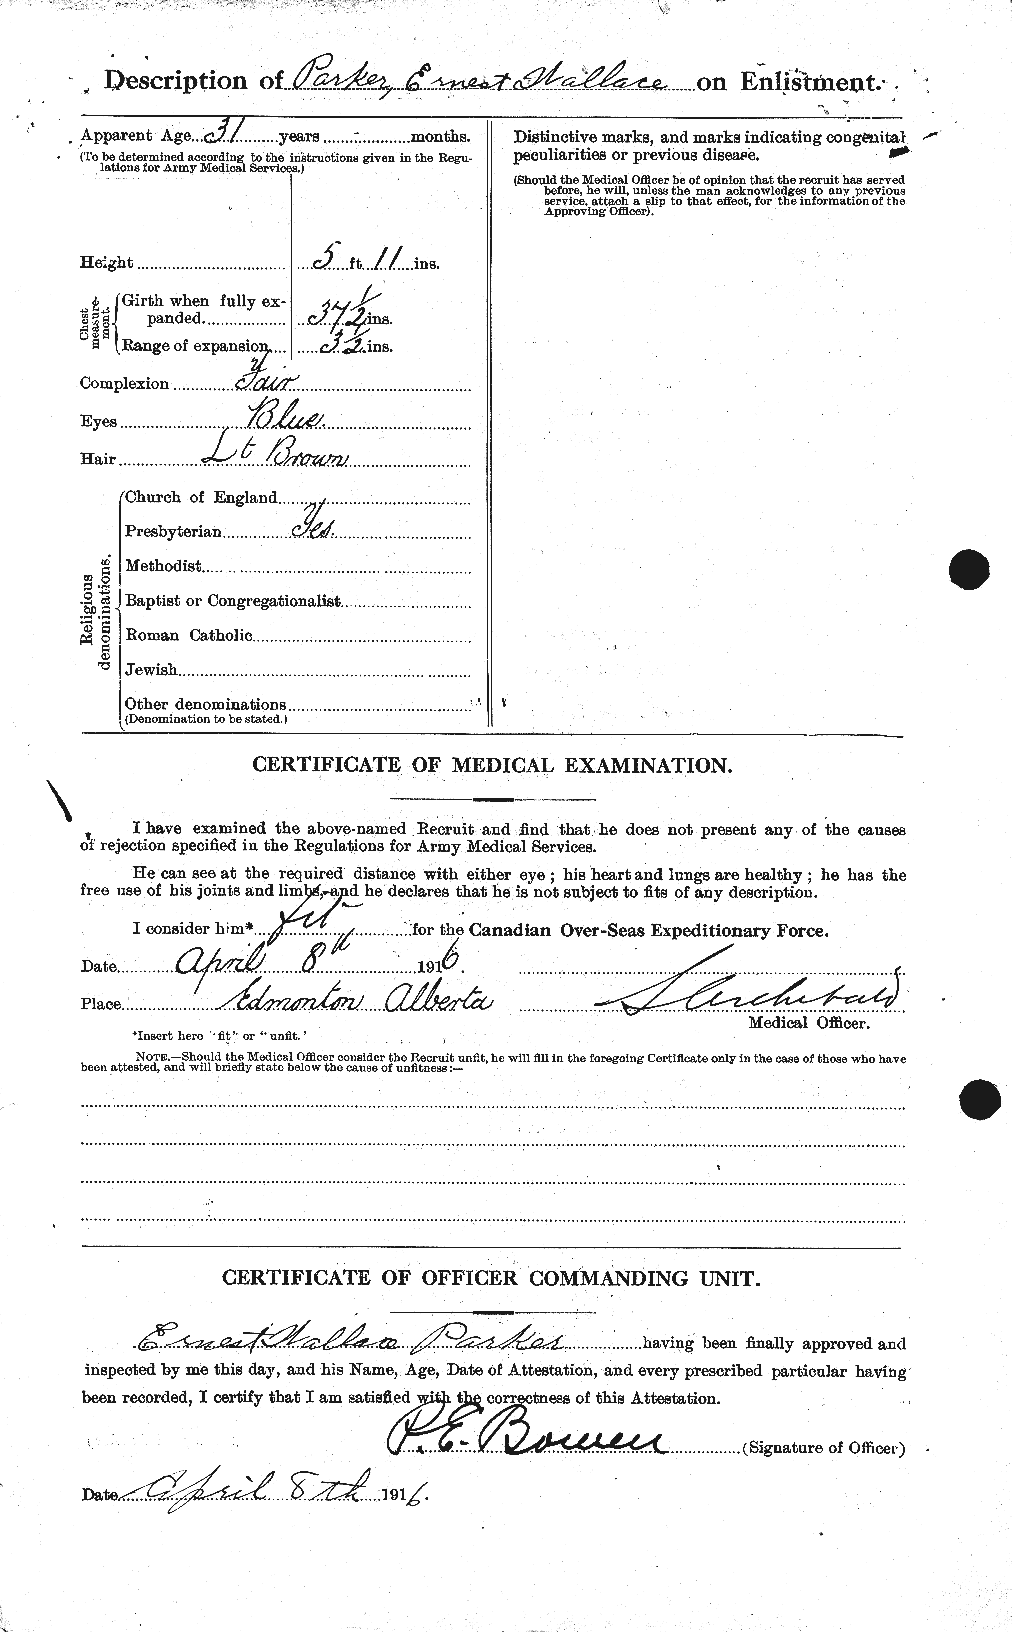 Personnel Records of the First World War - CEF 565168b